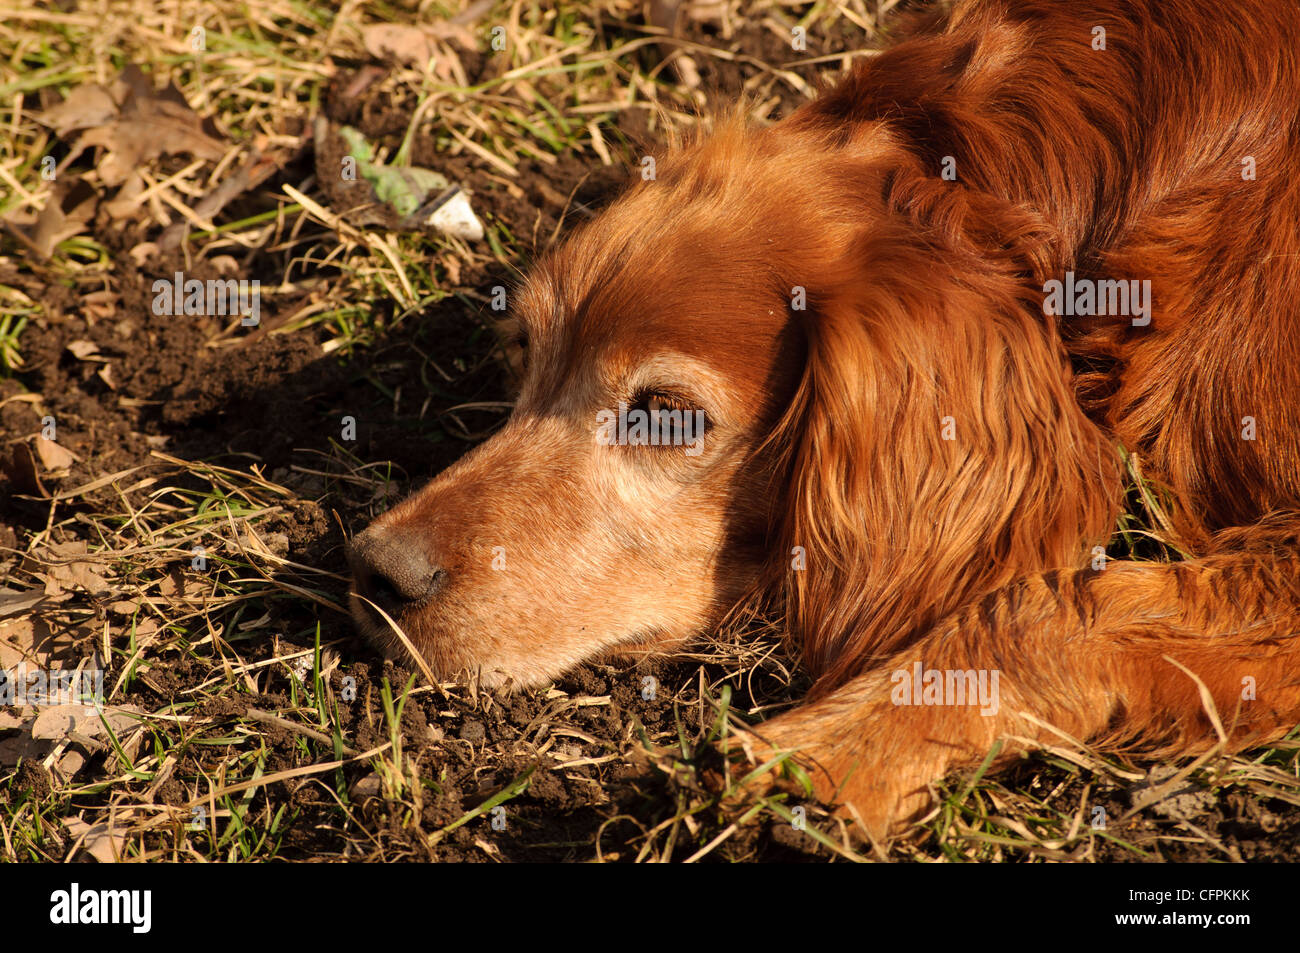 Dog relaxing Stock Photo